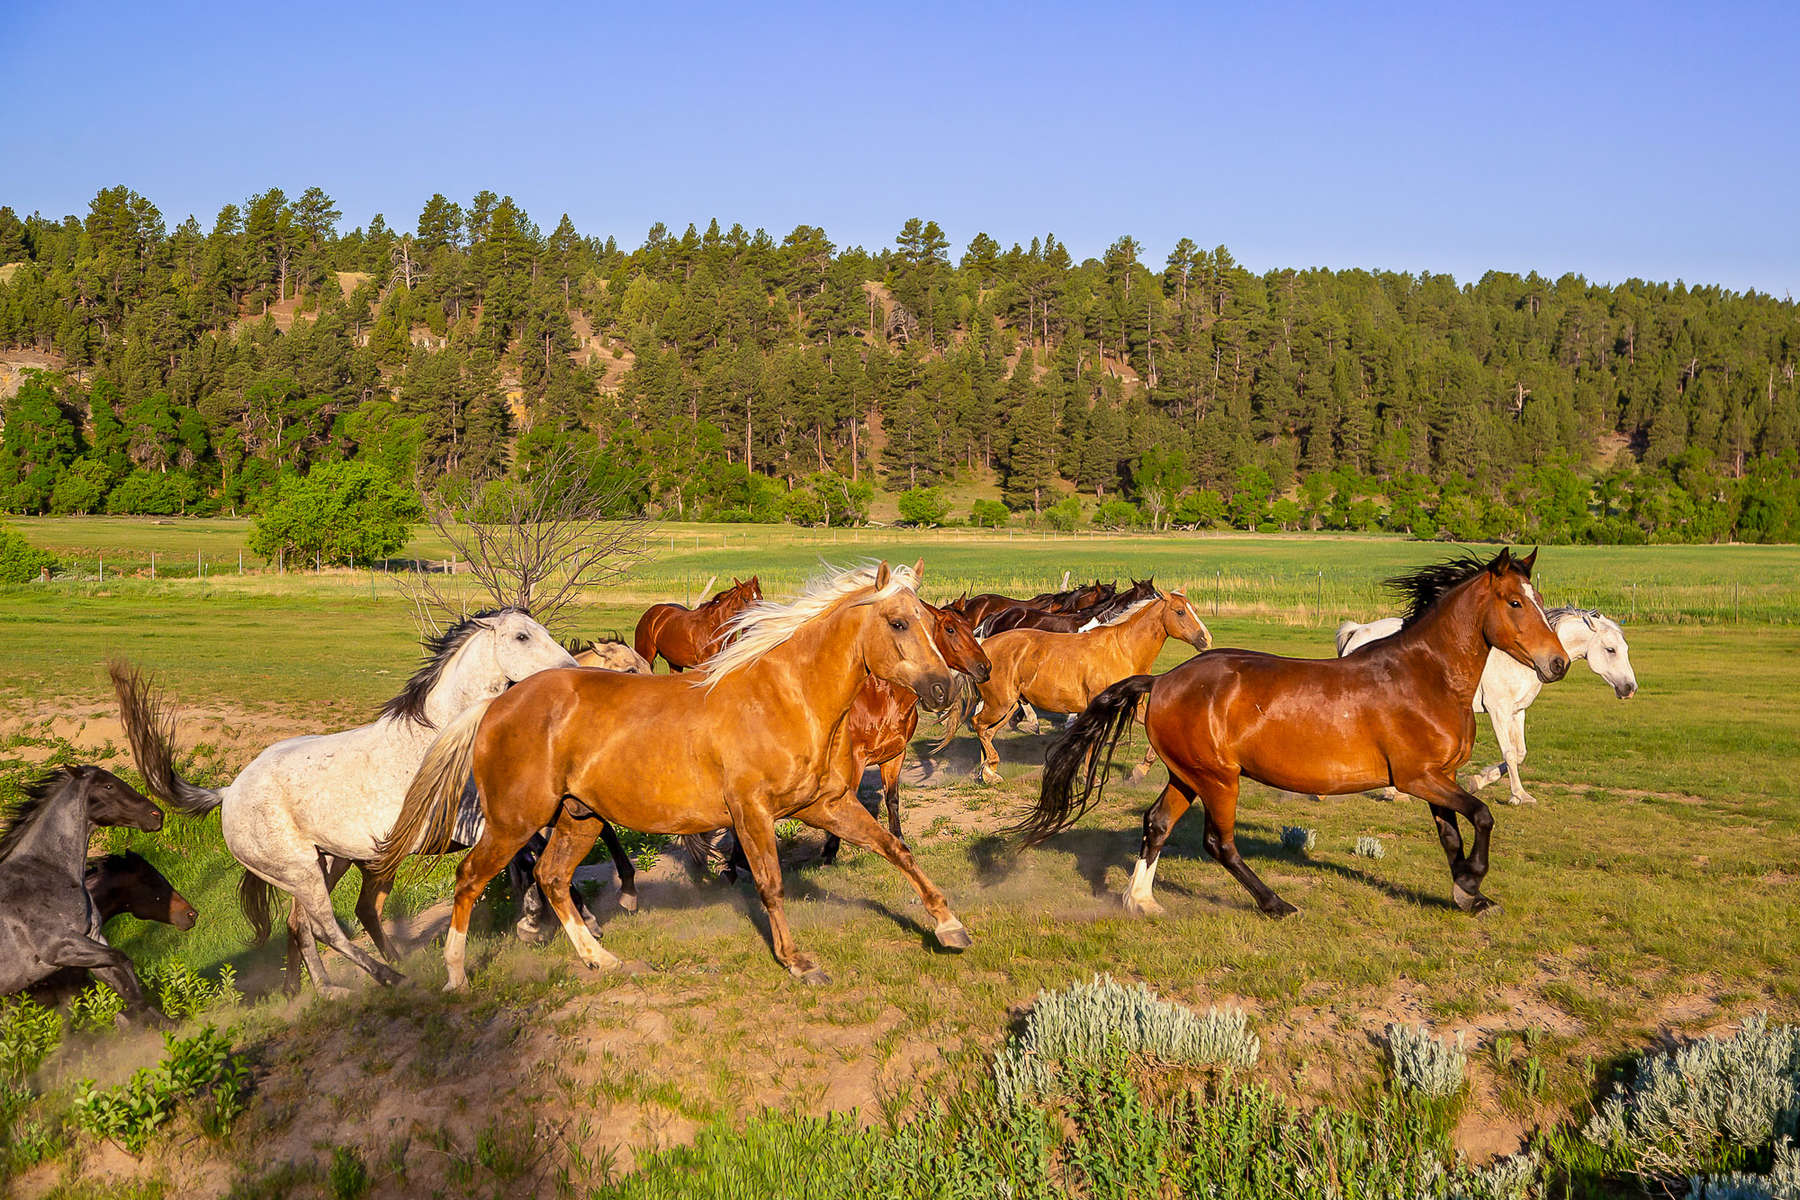 A herd of horses galloping in a field in the United States